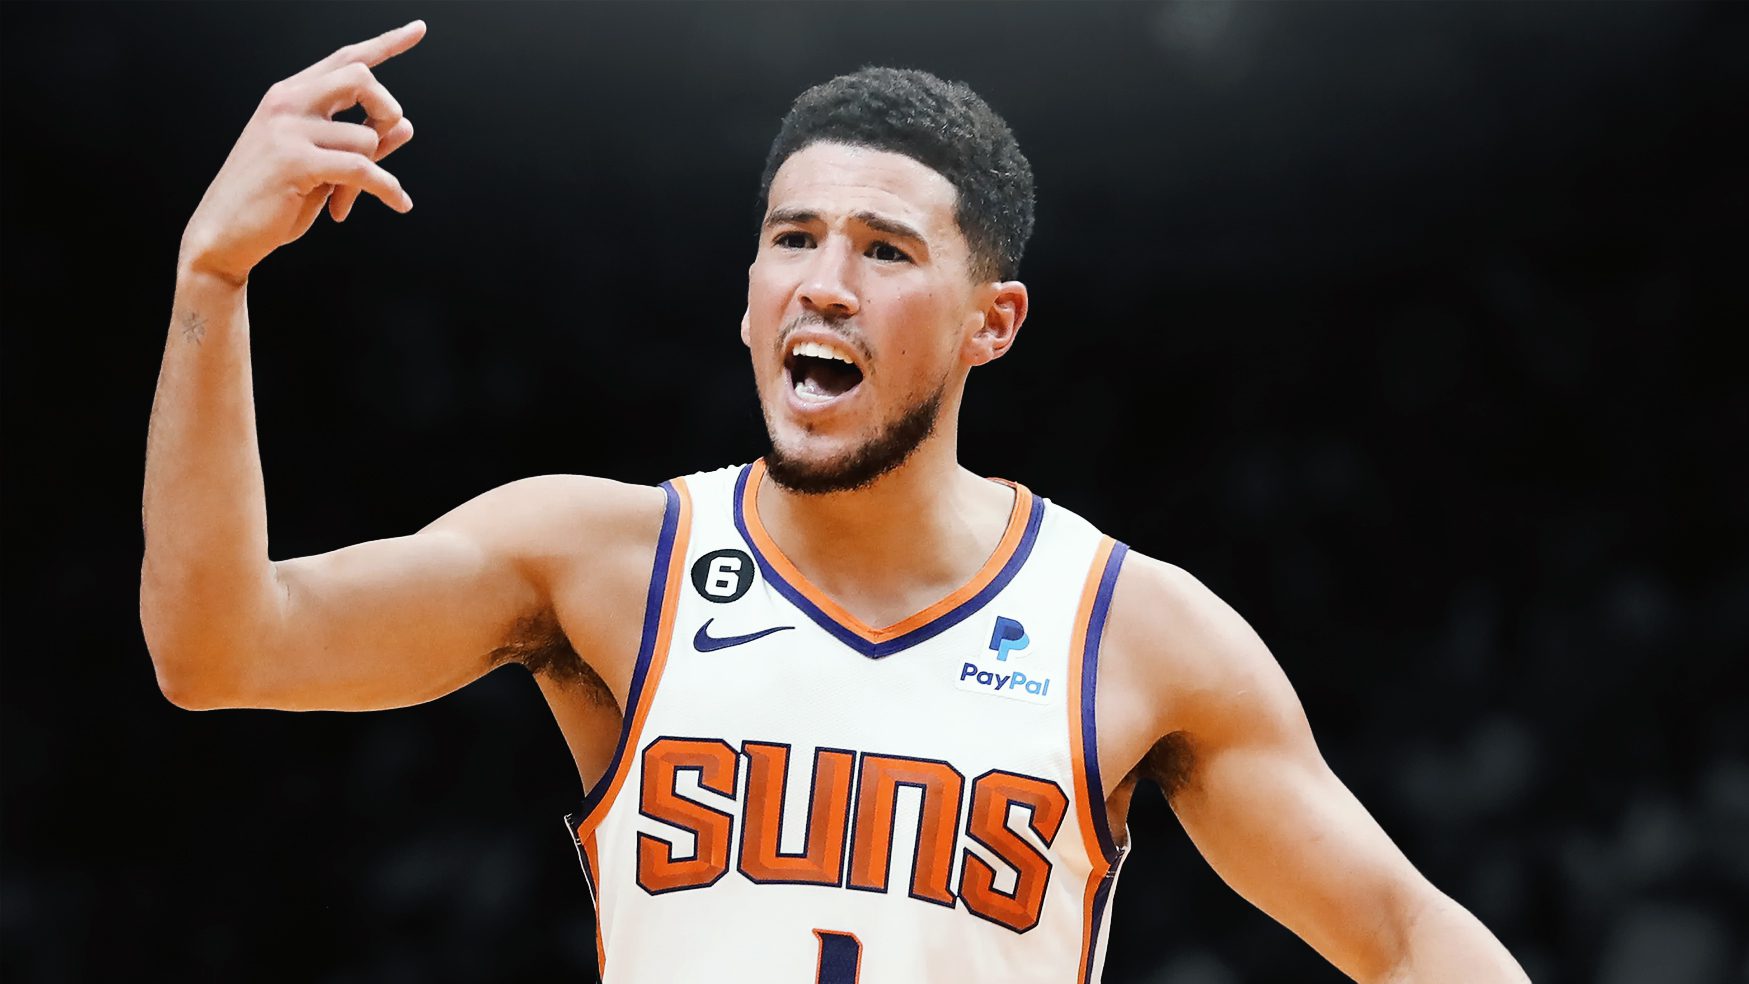 Devin Booker Implies Refs and NBA are Trying to Control Outcome of Games